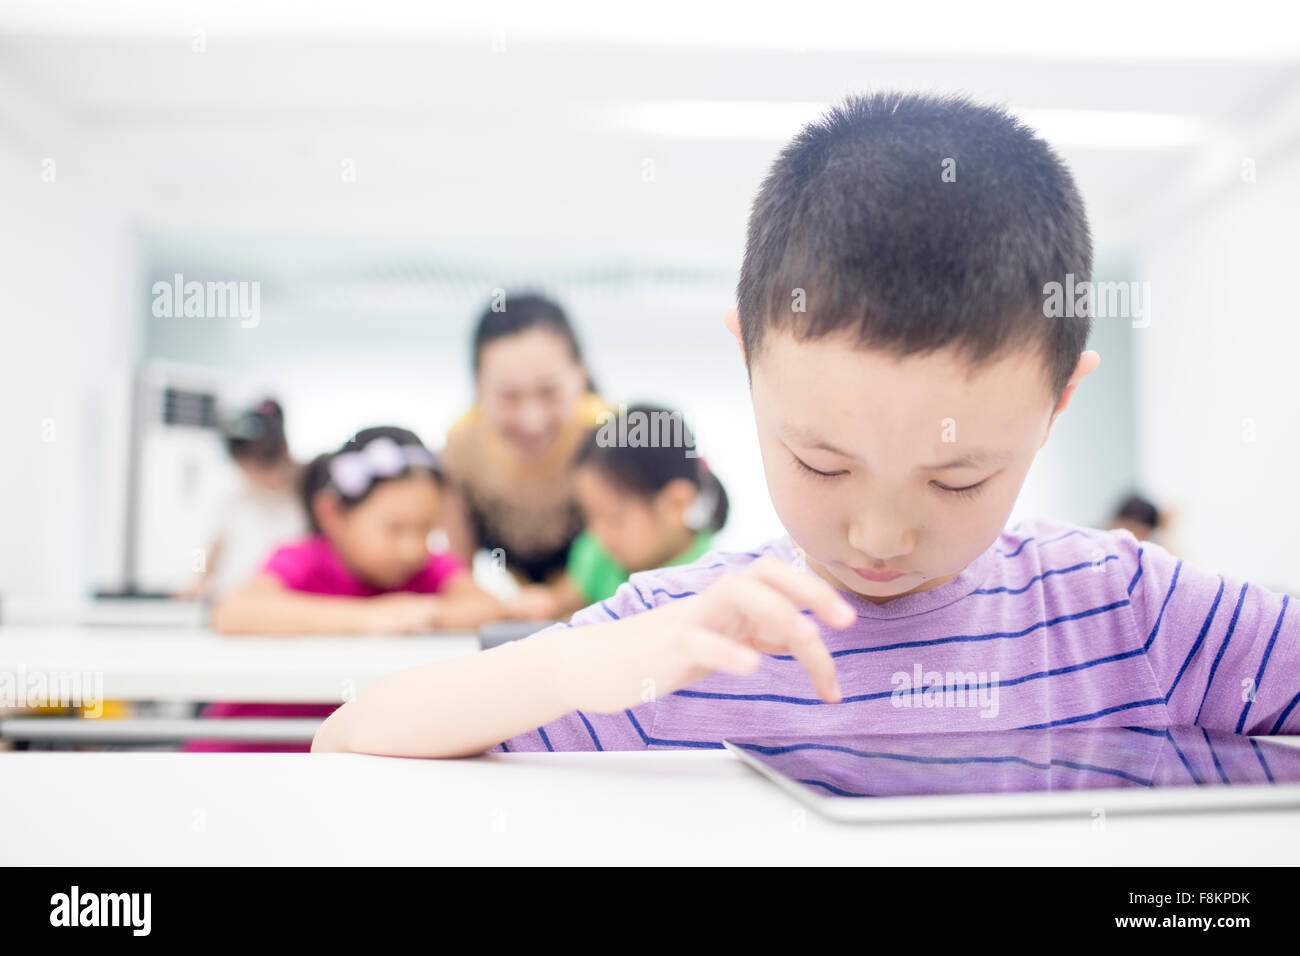 Boy using digital tablet while sitting at table in classroom Stock Photo